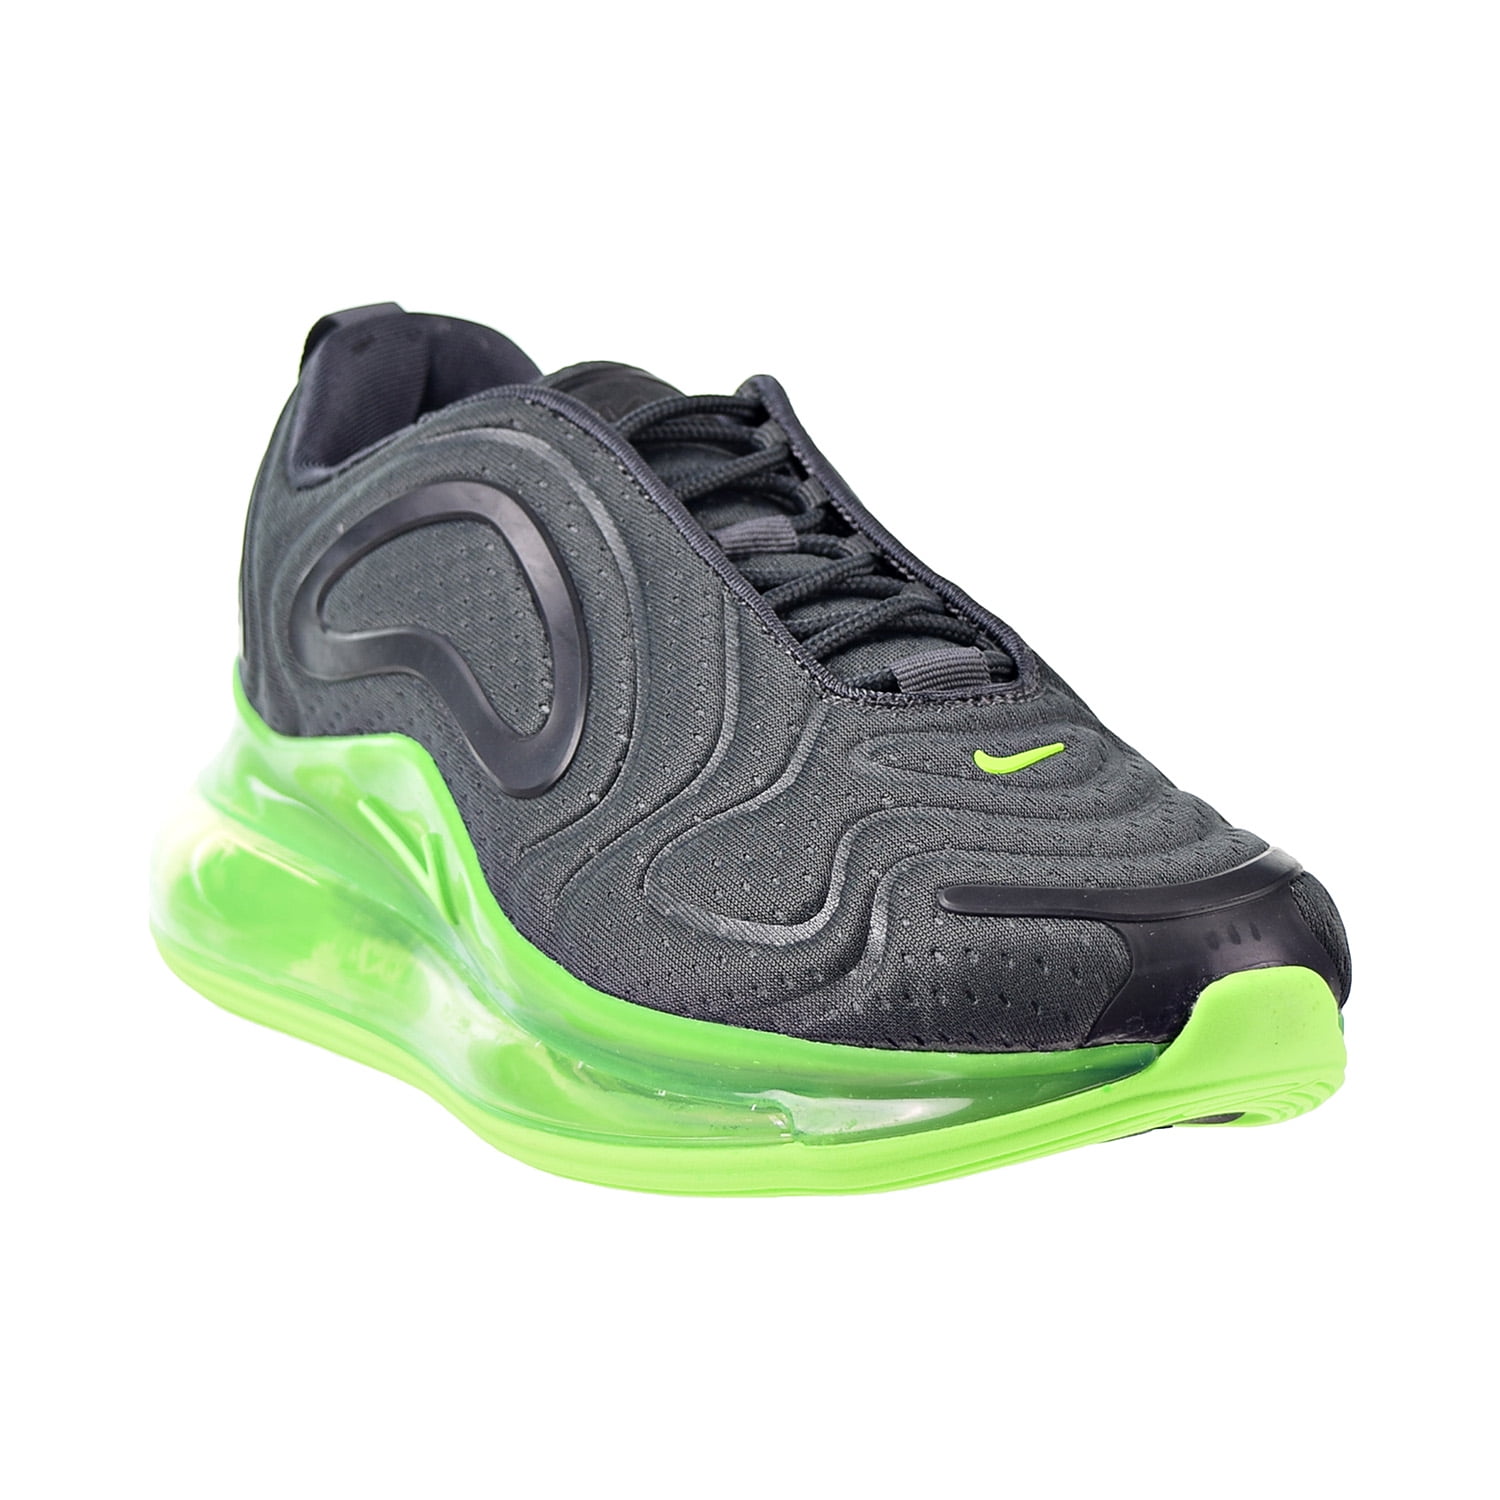 Nike Air Max 720 Sneakers In Black And Green Ao2924-008 for Men